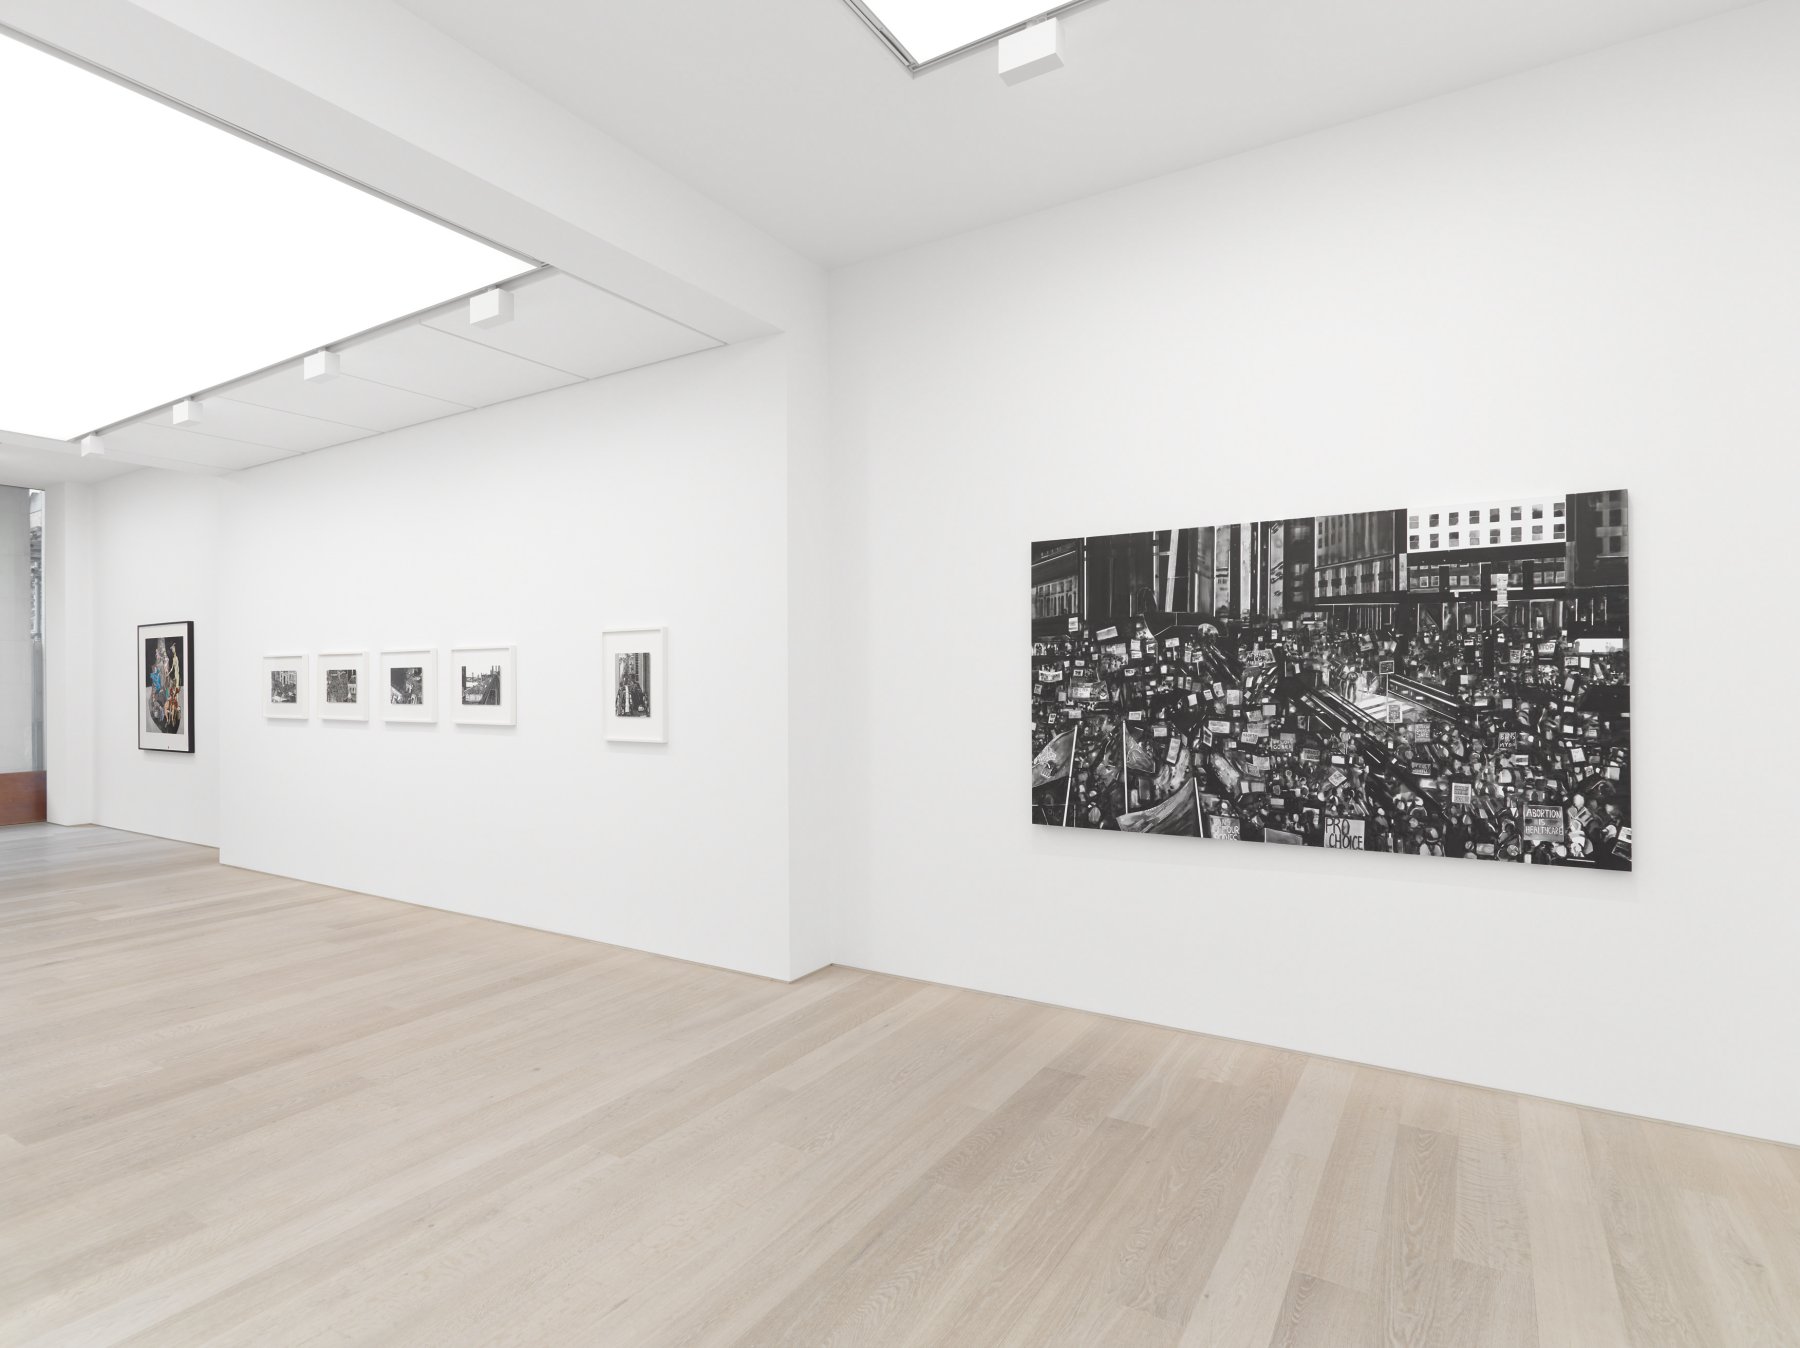 Installation image for Image as Protest: Joy Gerrard & Paula Rego, at Cristea Roberts Gallery